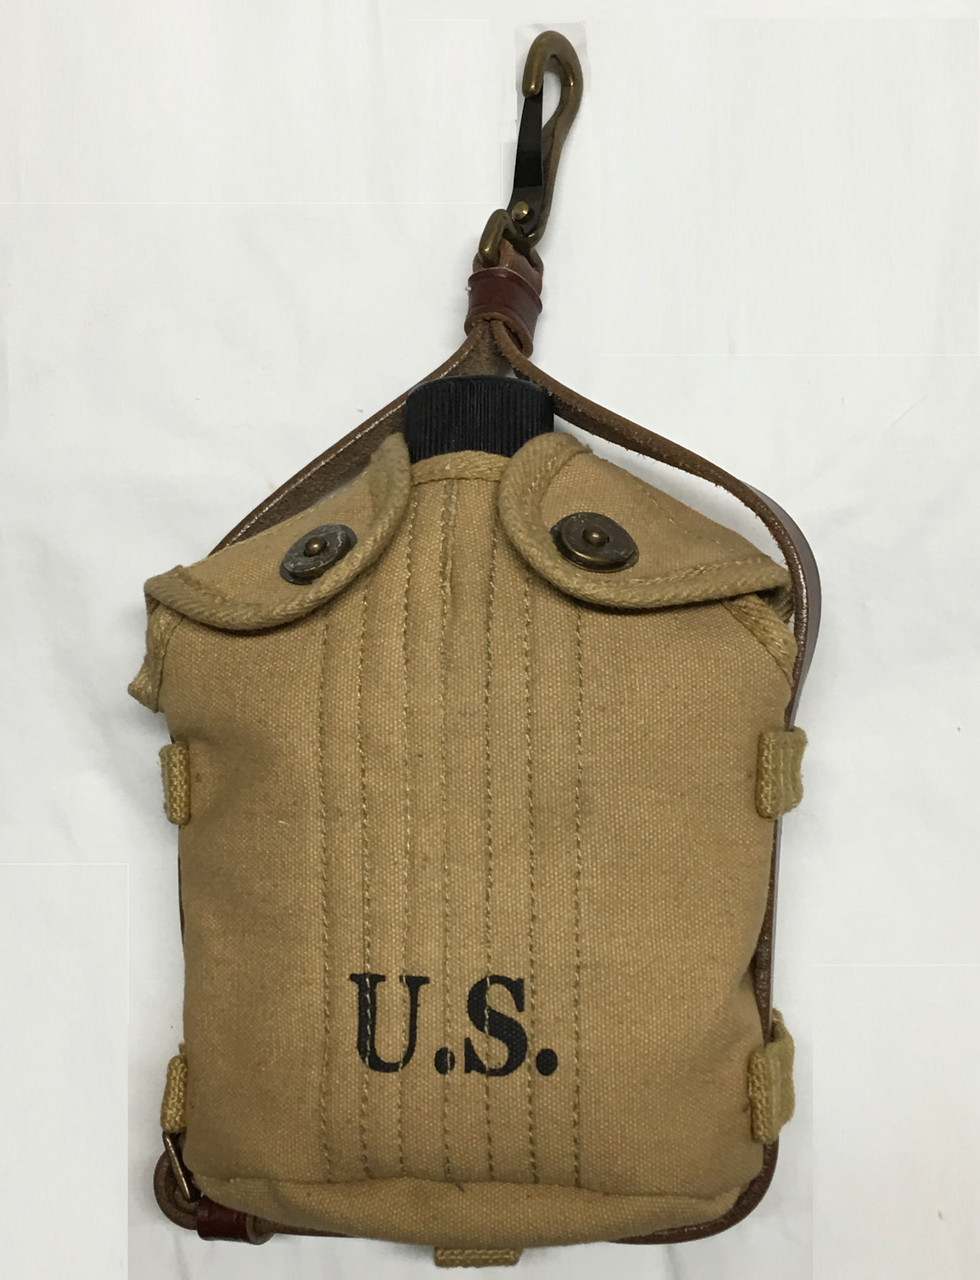 US WW2 Cavalry Canteen Cover - SARCO, Inc